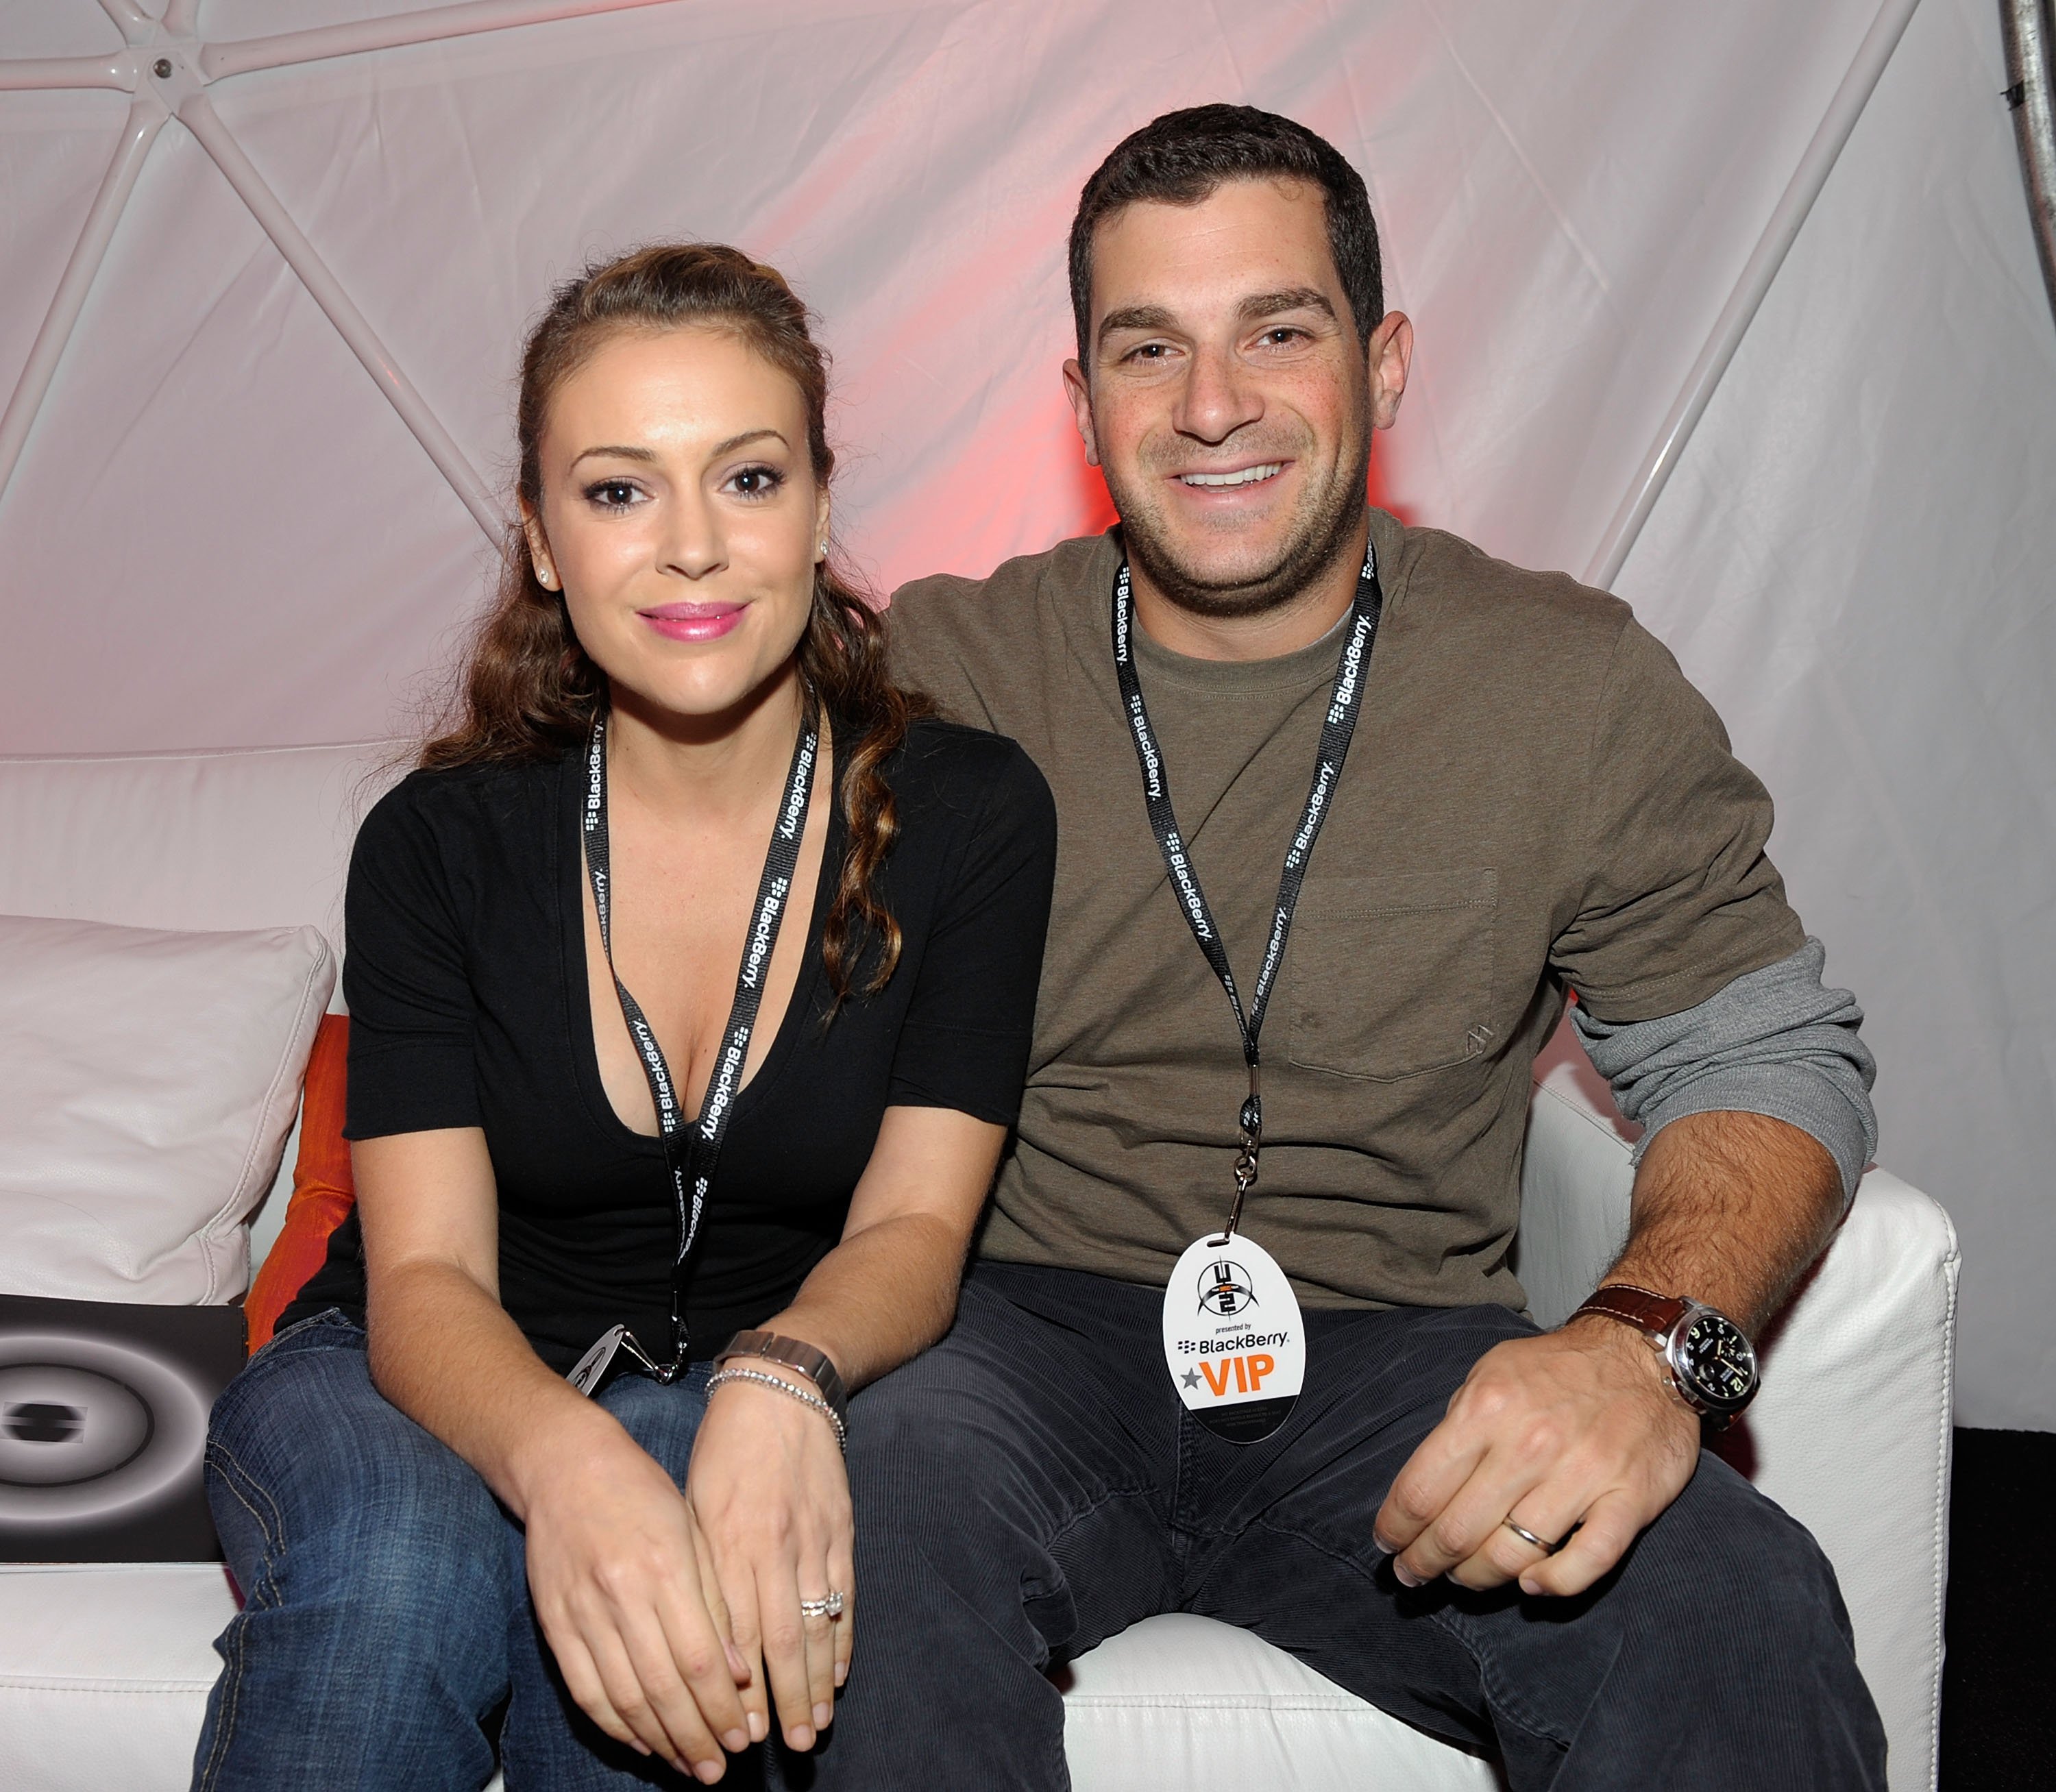 Actress Alyssa Milano (L) and agent David Bugliari attend the BlackBerry VIP Hospitality Lounge at the U2 Concert at the Rose Bowl on October 25, 2009, in Pasadena, California. | Source: Getty Images